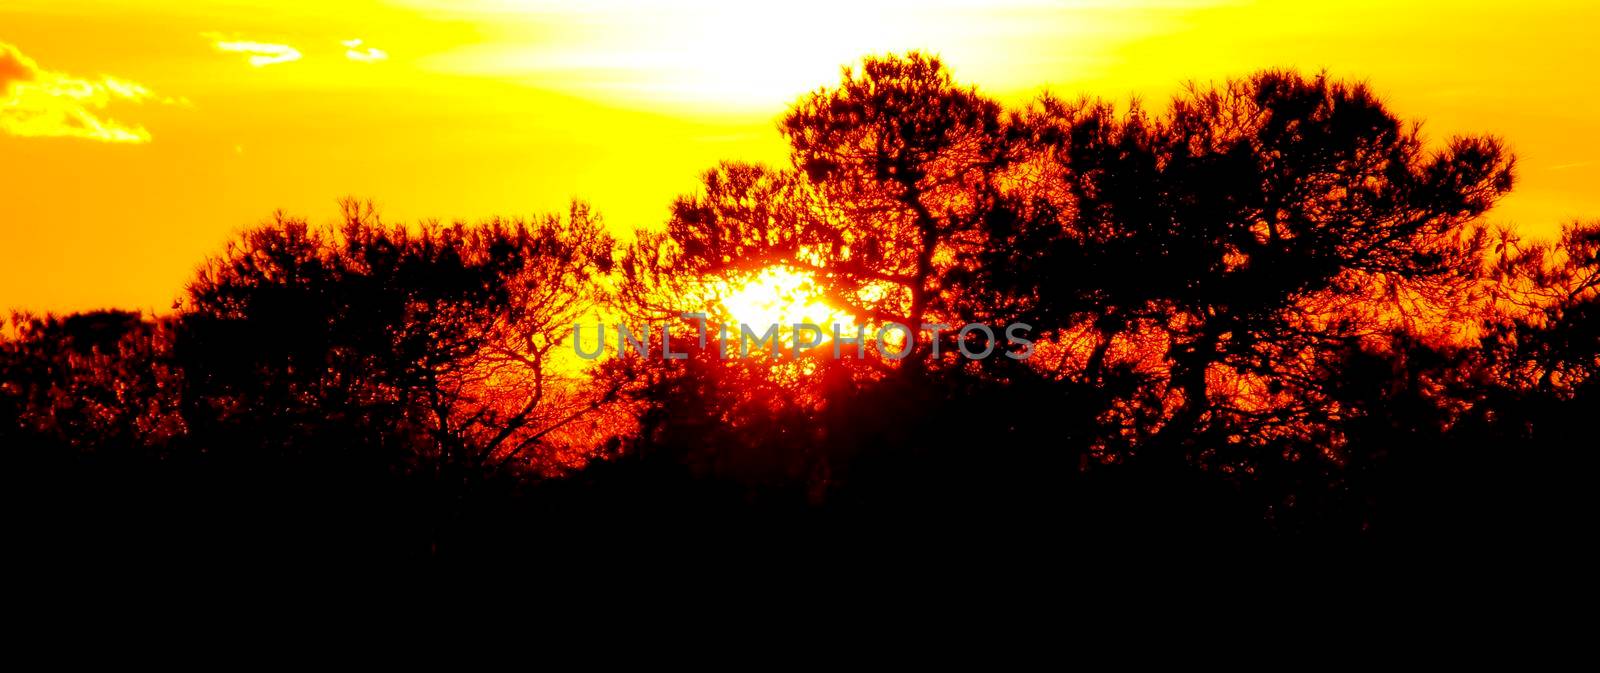 Countryside landscape at sunset with pines and native plants by soniabonet